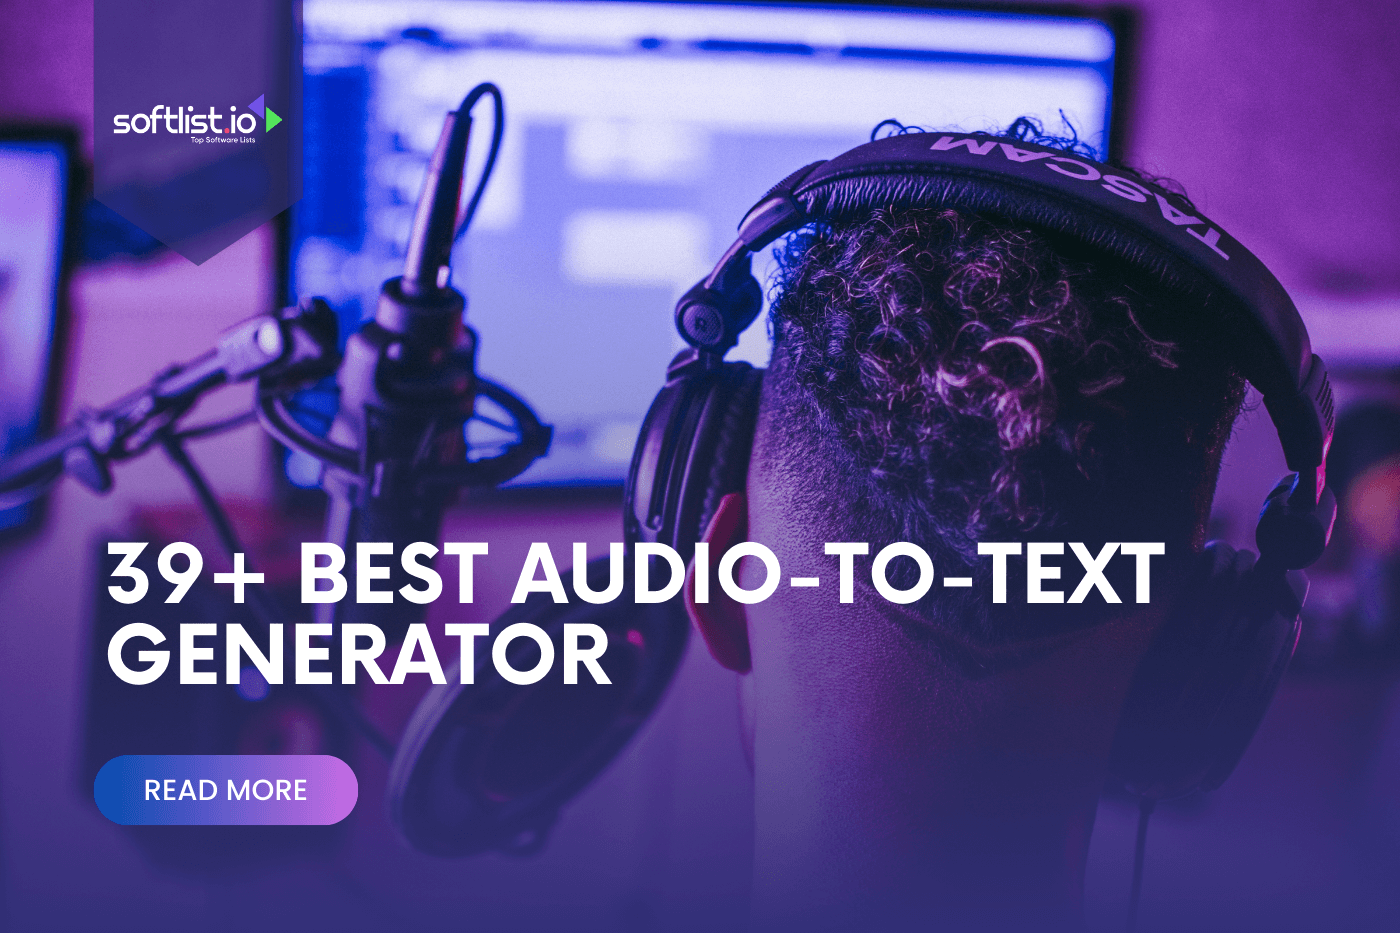 Transcribe Audio to Text With These 39+ Best Audio-To-Text Generator